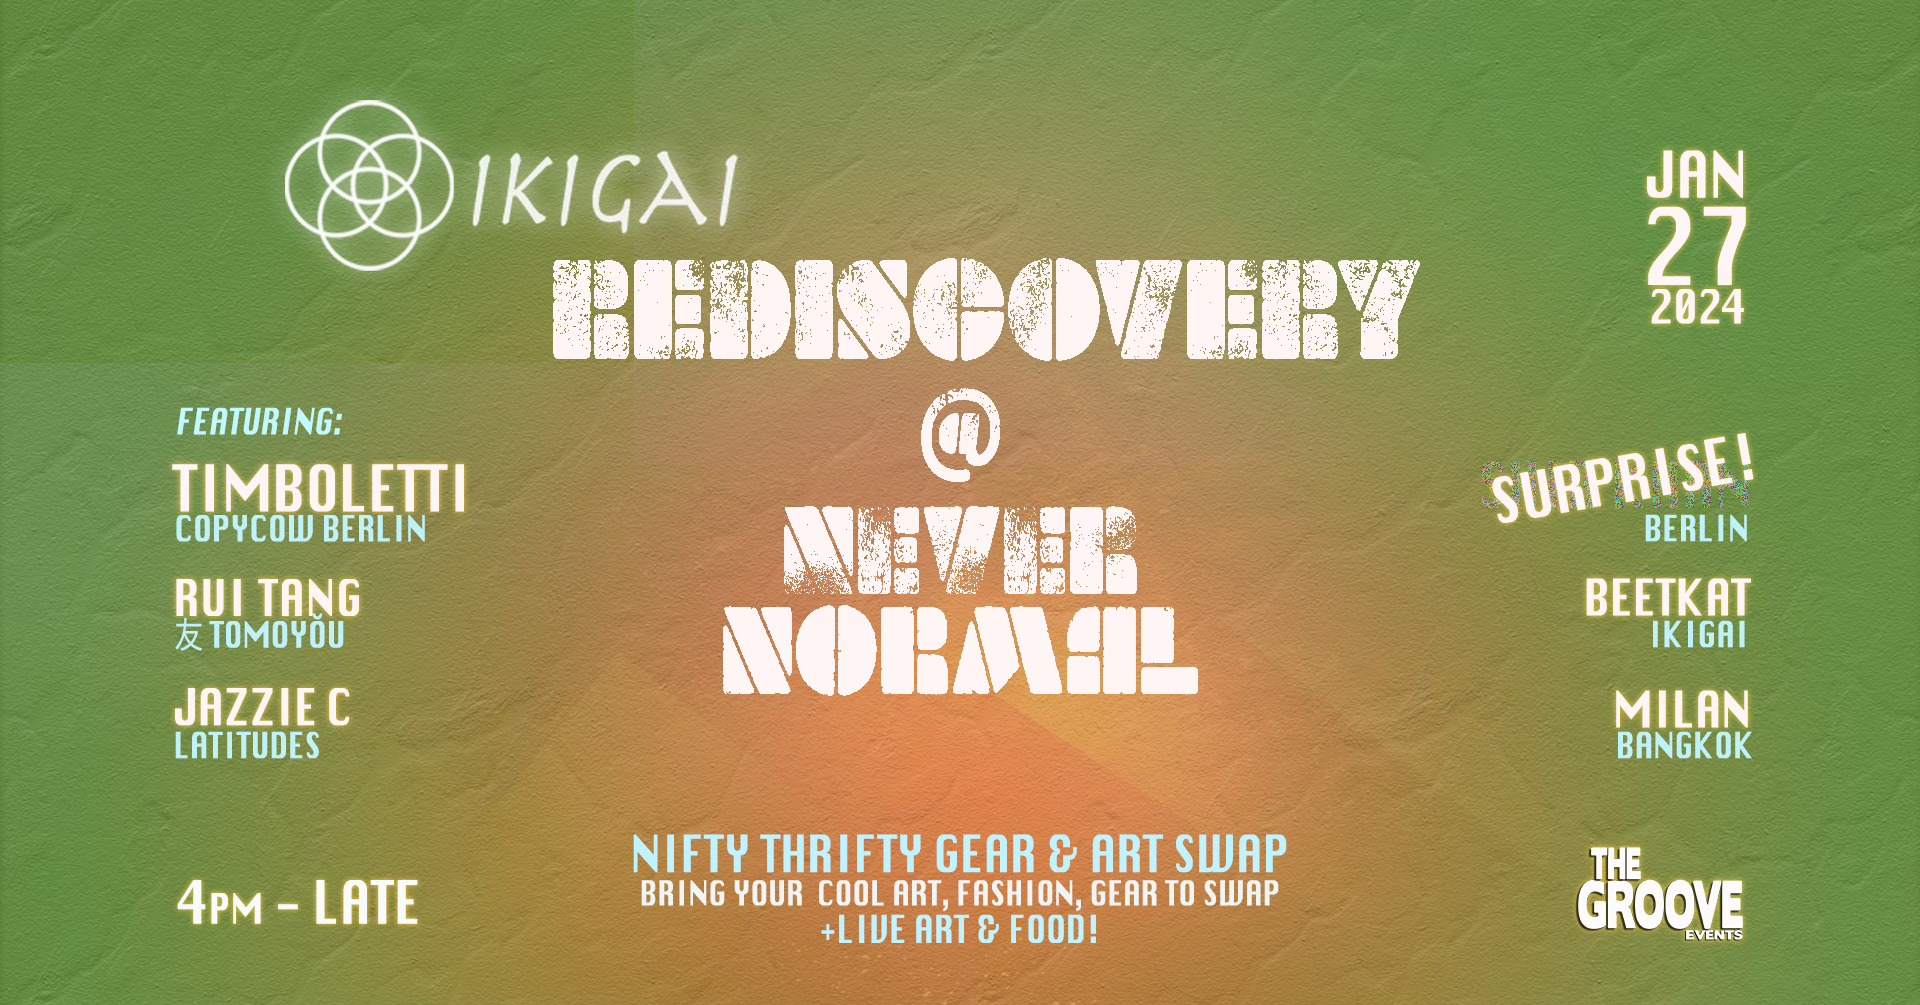 Ikigai: Rediscovery with BeetKat & Friends - feat. Timboletti, Rui Tang & Surprise guest - フライヤー表